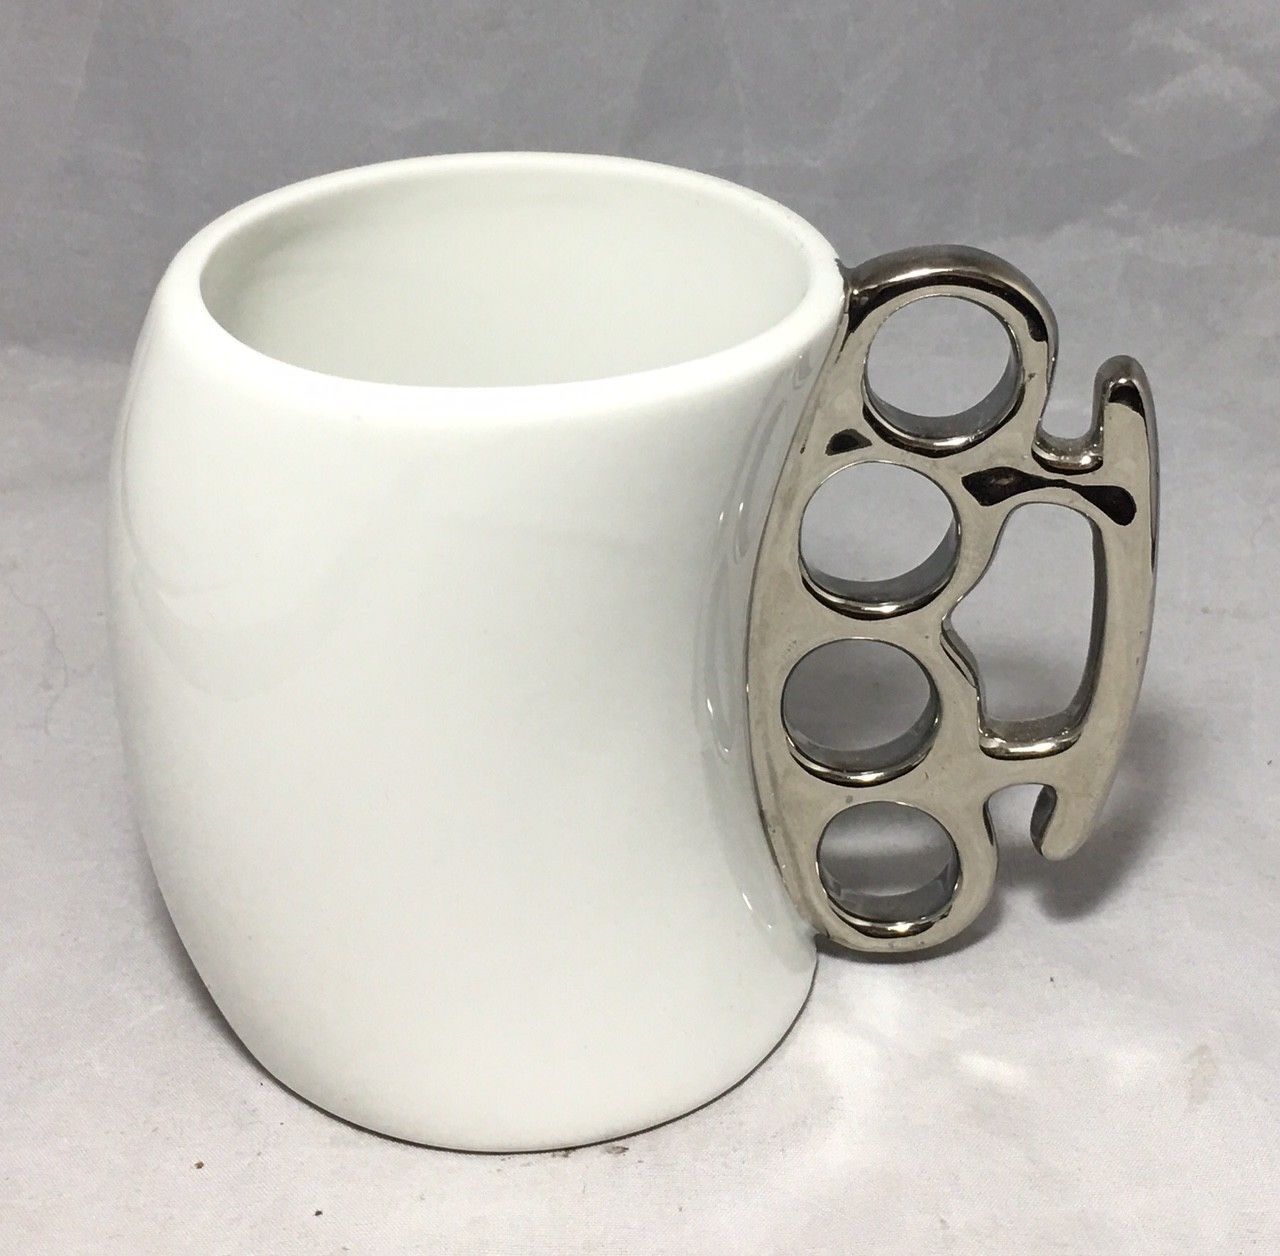 Primary image for 2009 Fred White Chrome Periclean mug mint